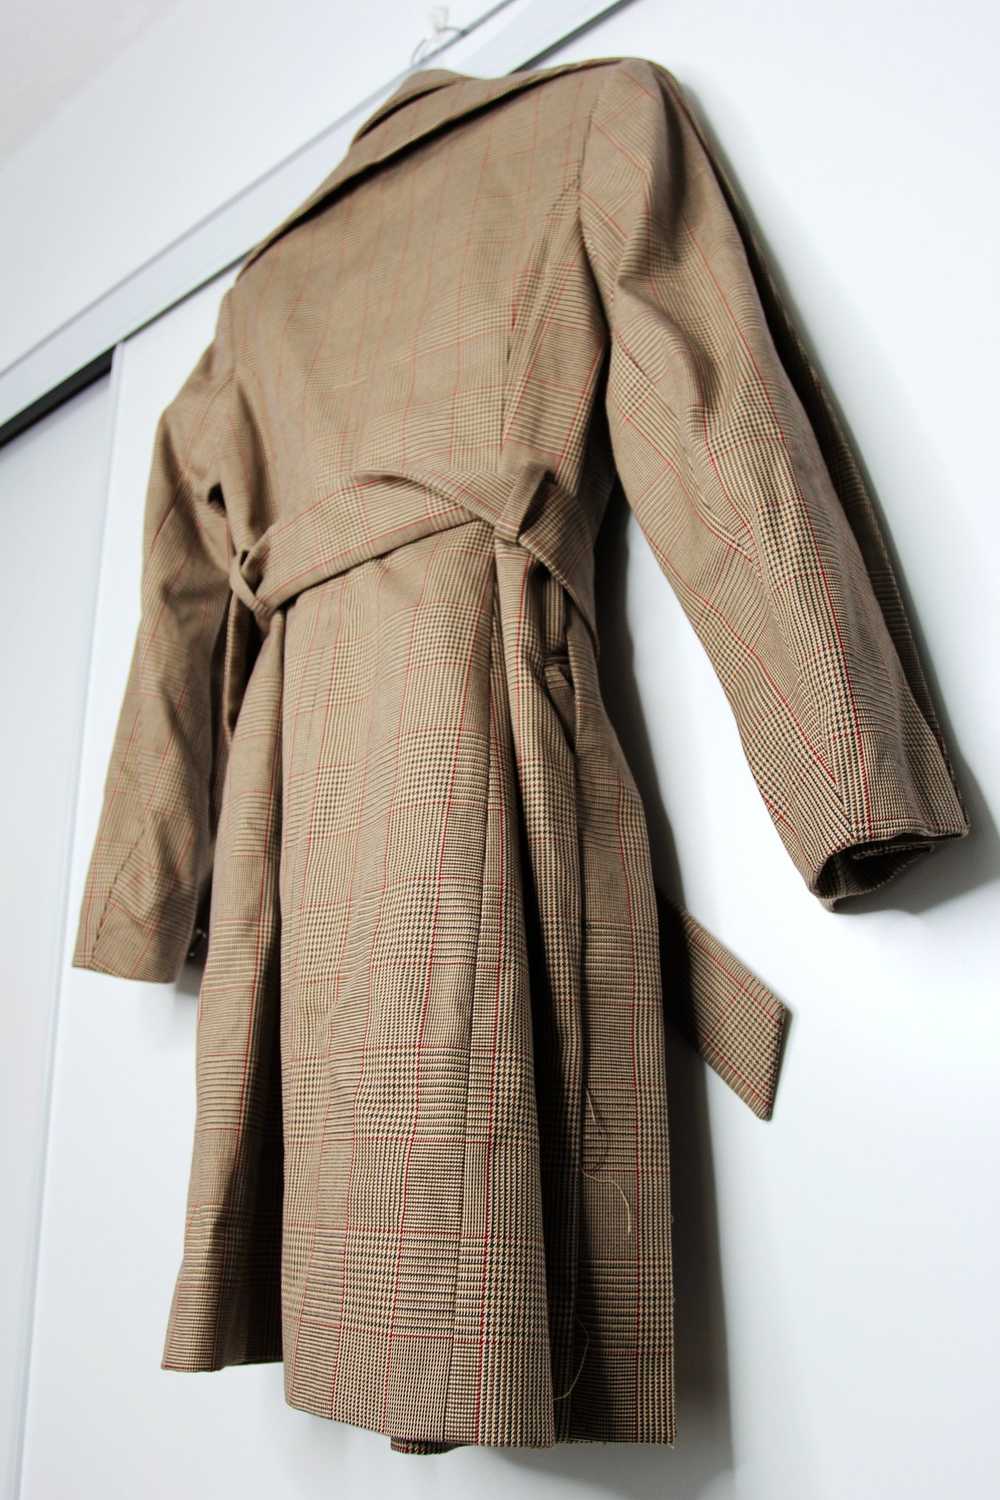 Y/Project SS19 Y/PROJECT PLAID PRINT TRENCH COAT L - image 11